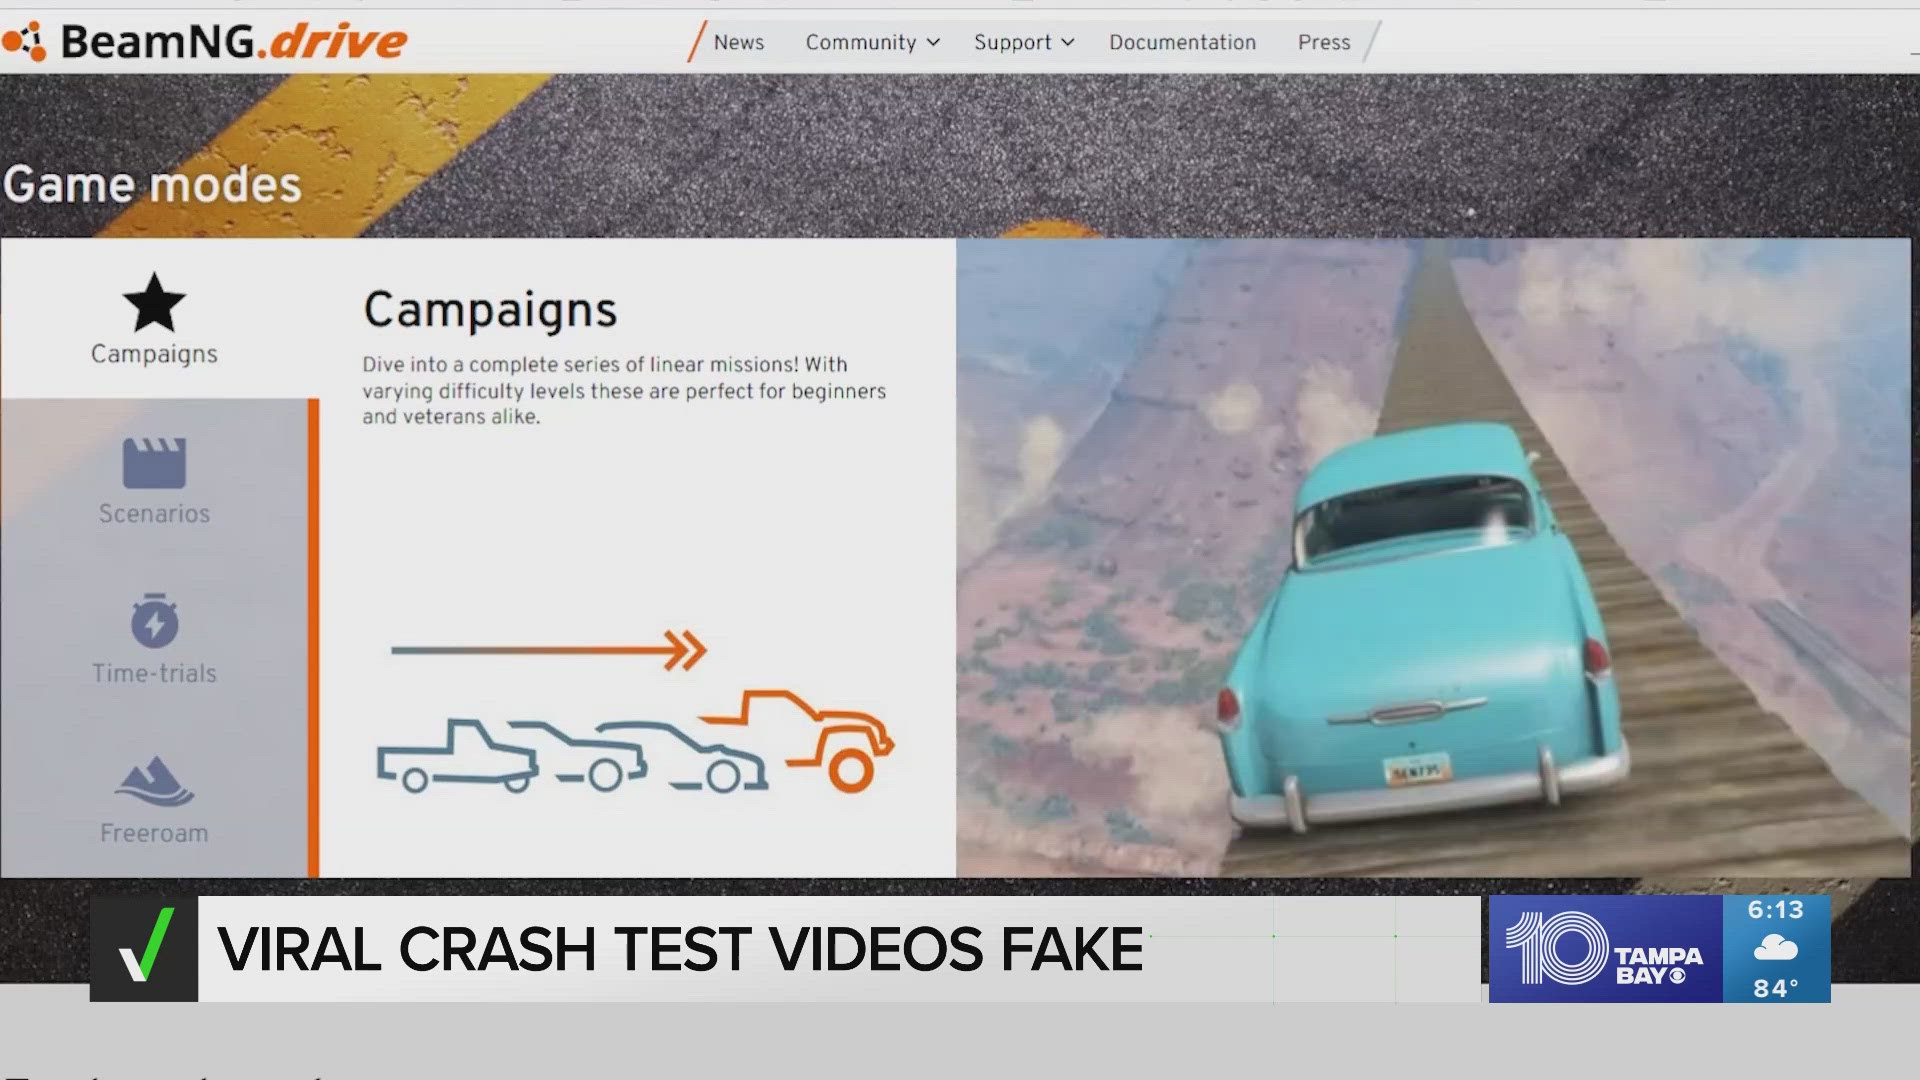 Our VERIFY team discovered that the animated videos do not show real crash tests.